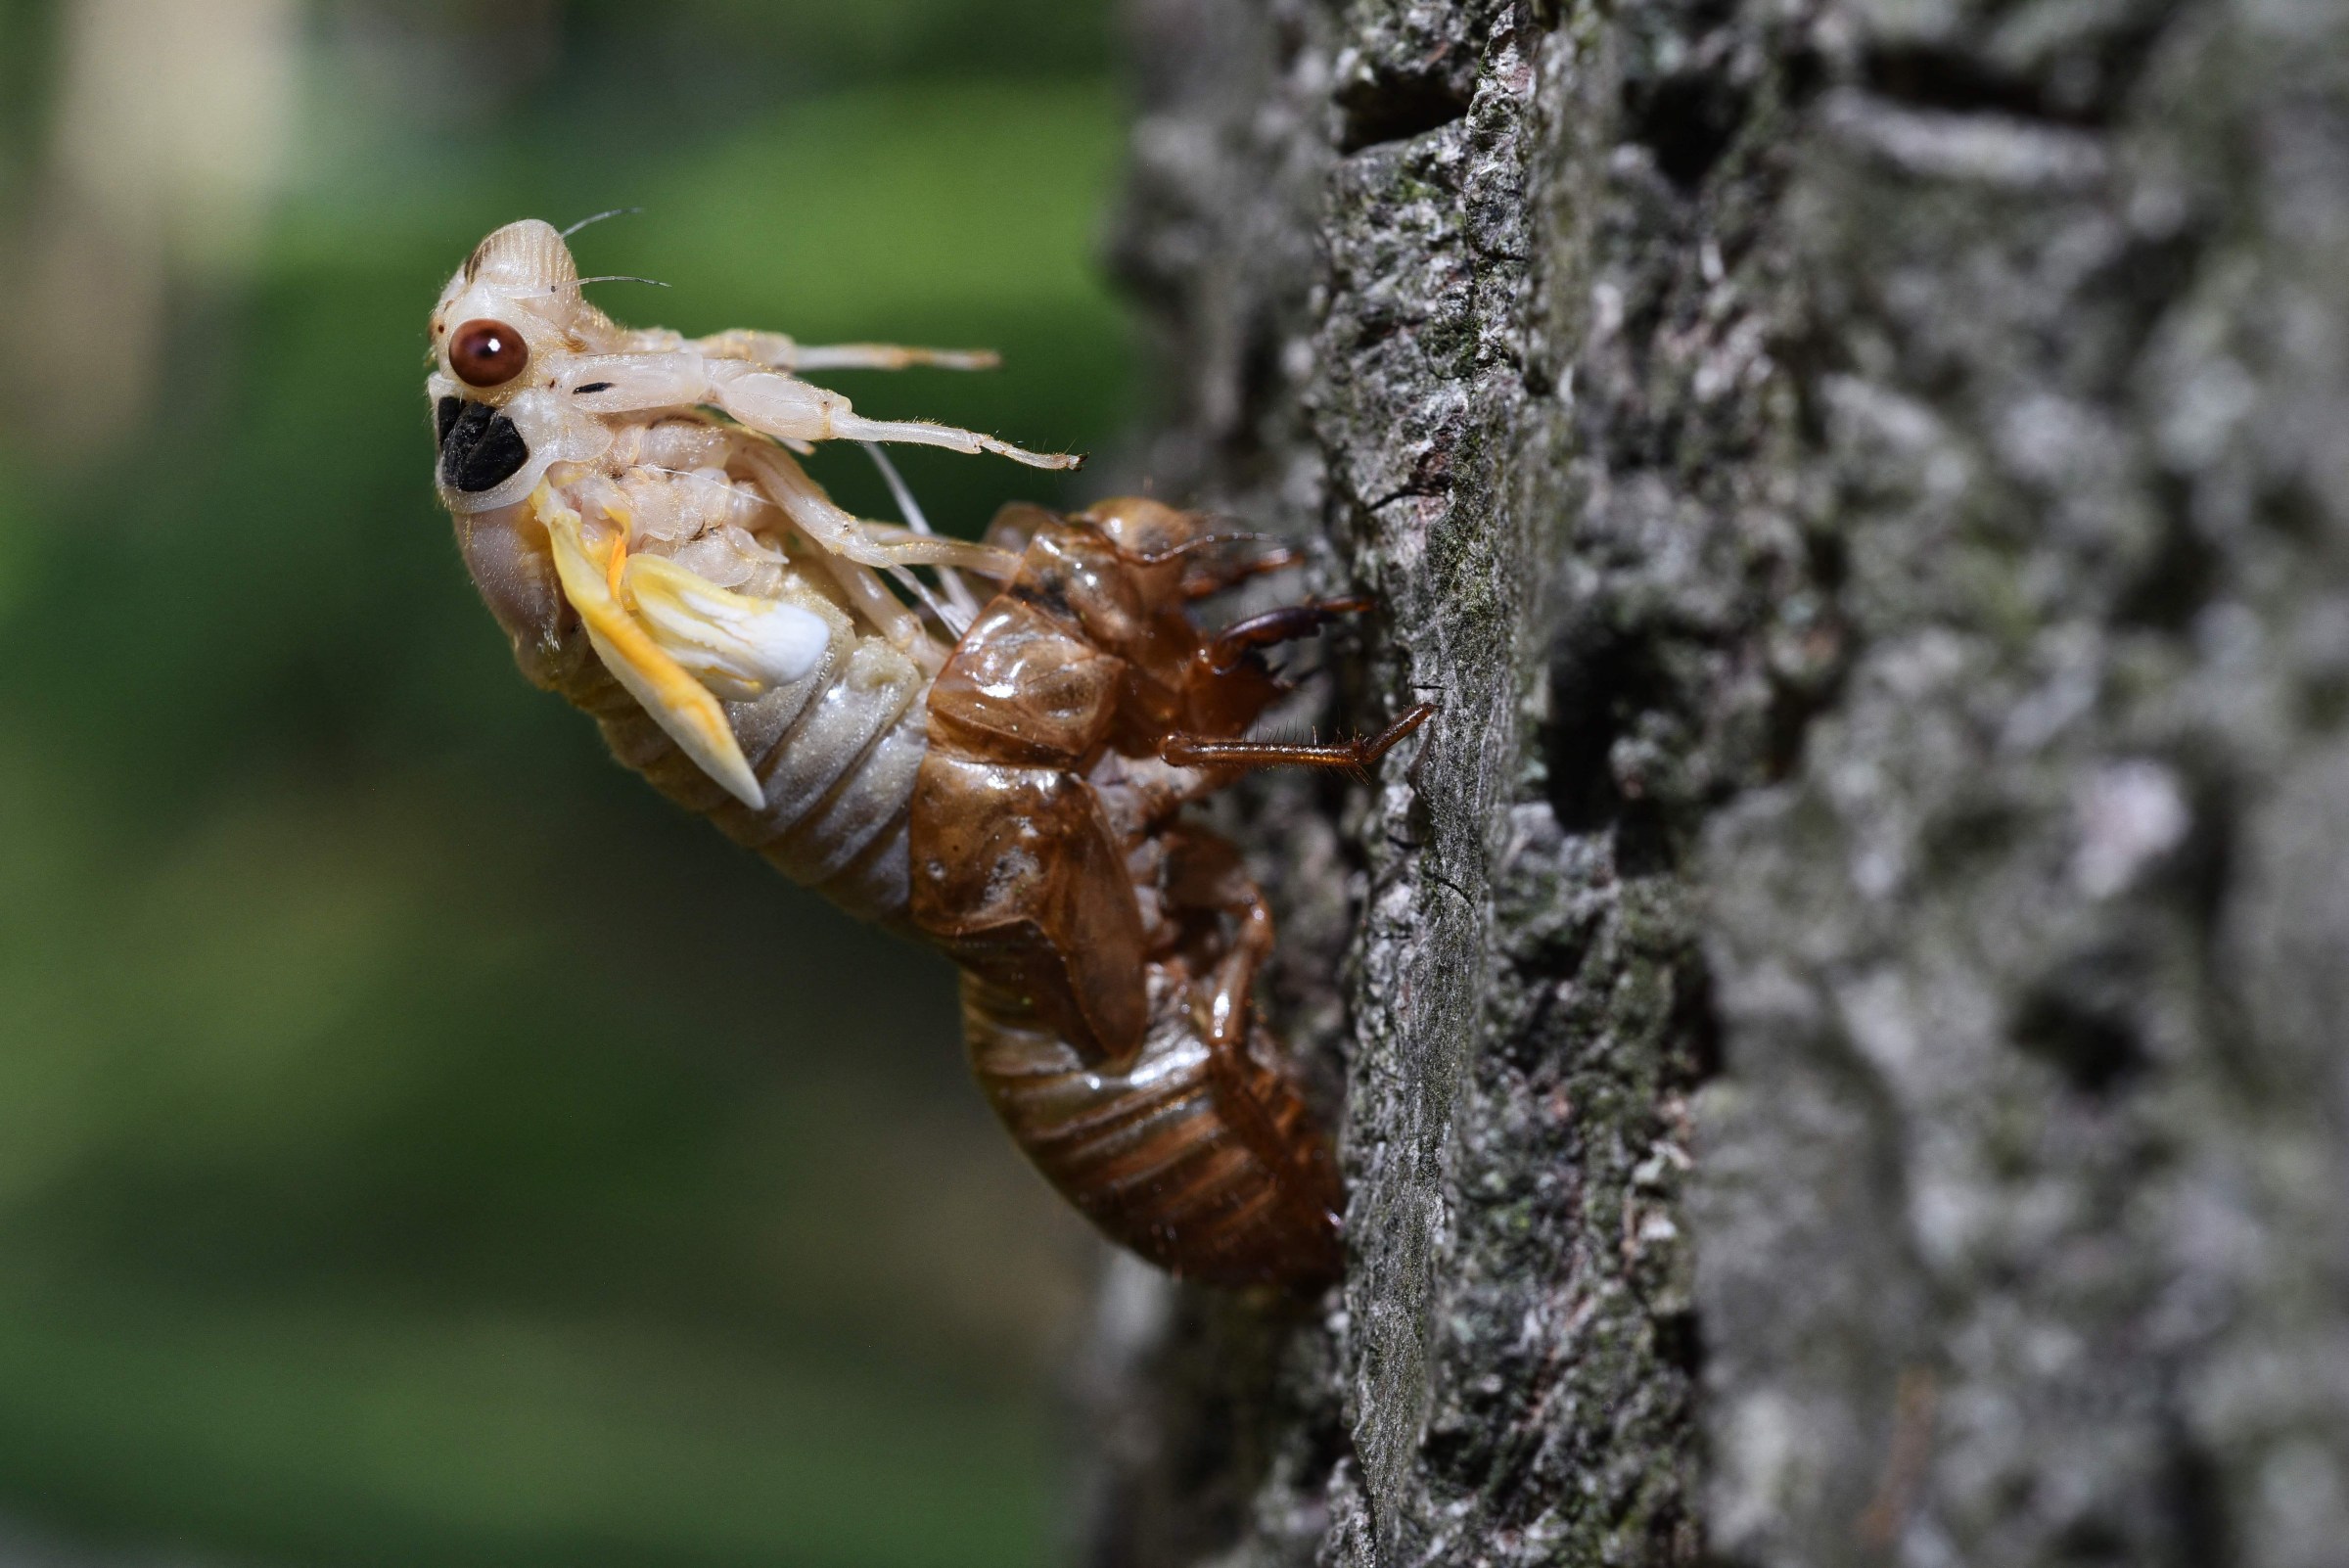 A cicada from Brood X mid-molt in Washington, DC in 2021.